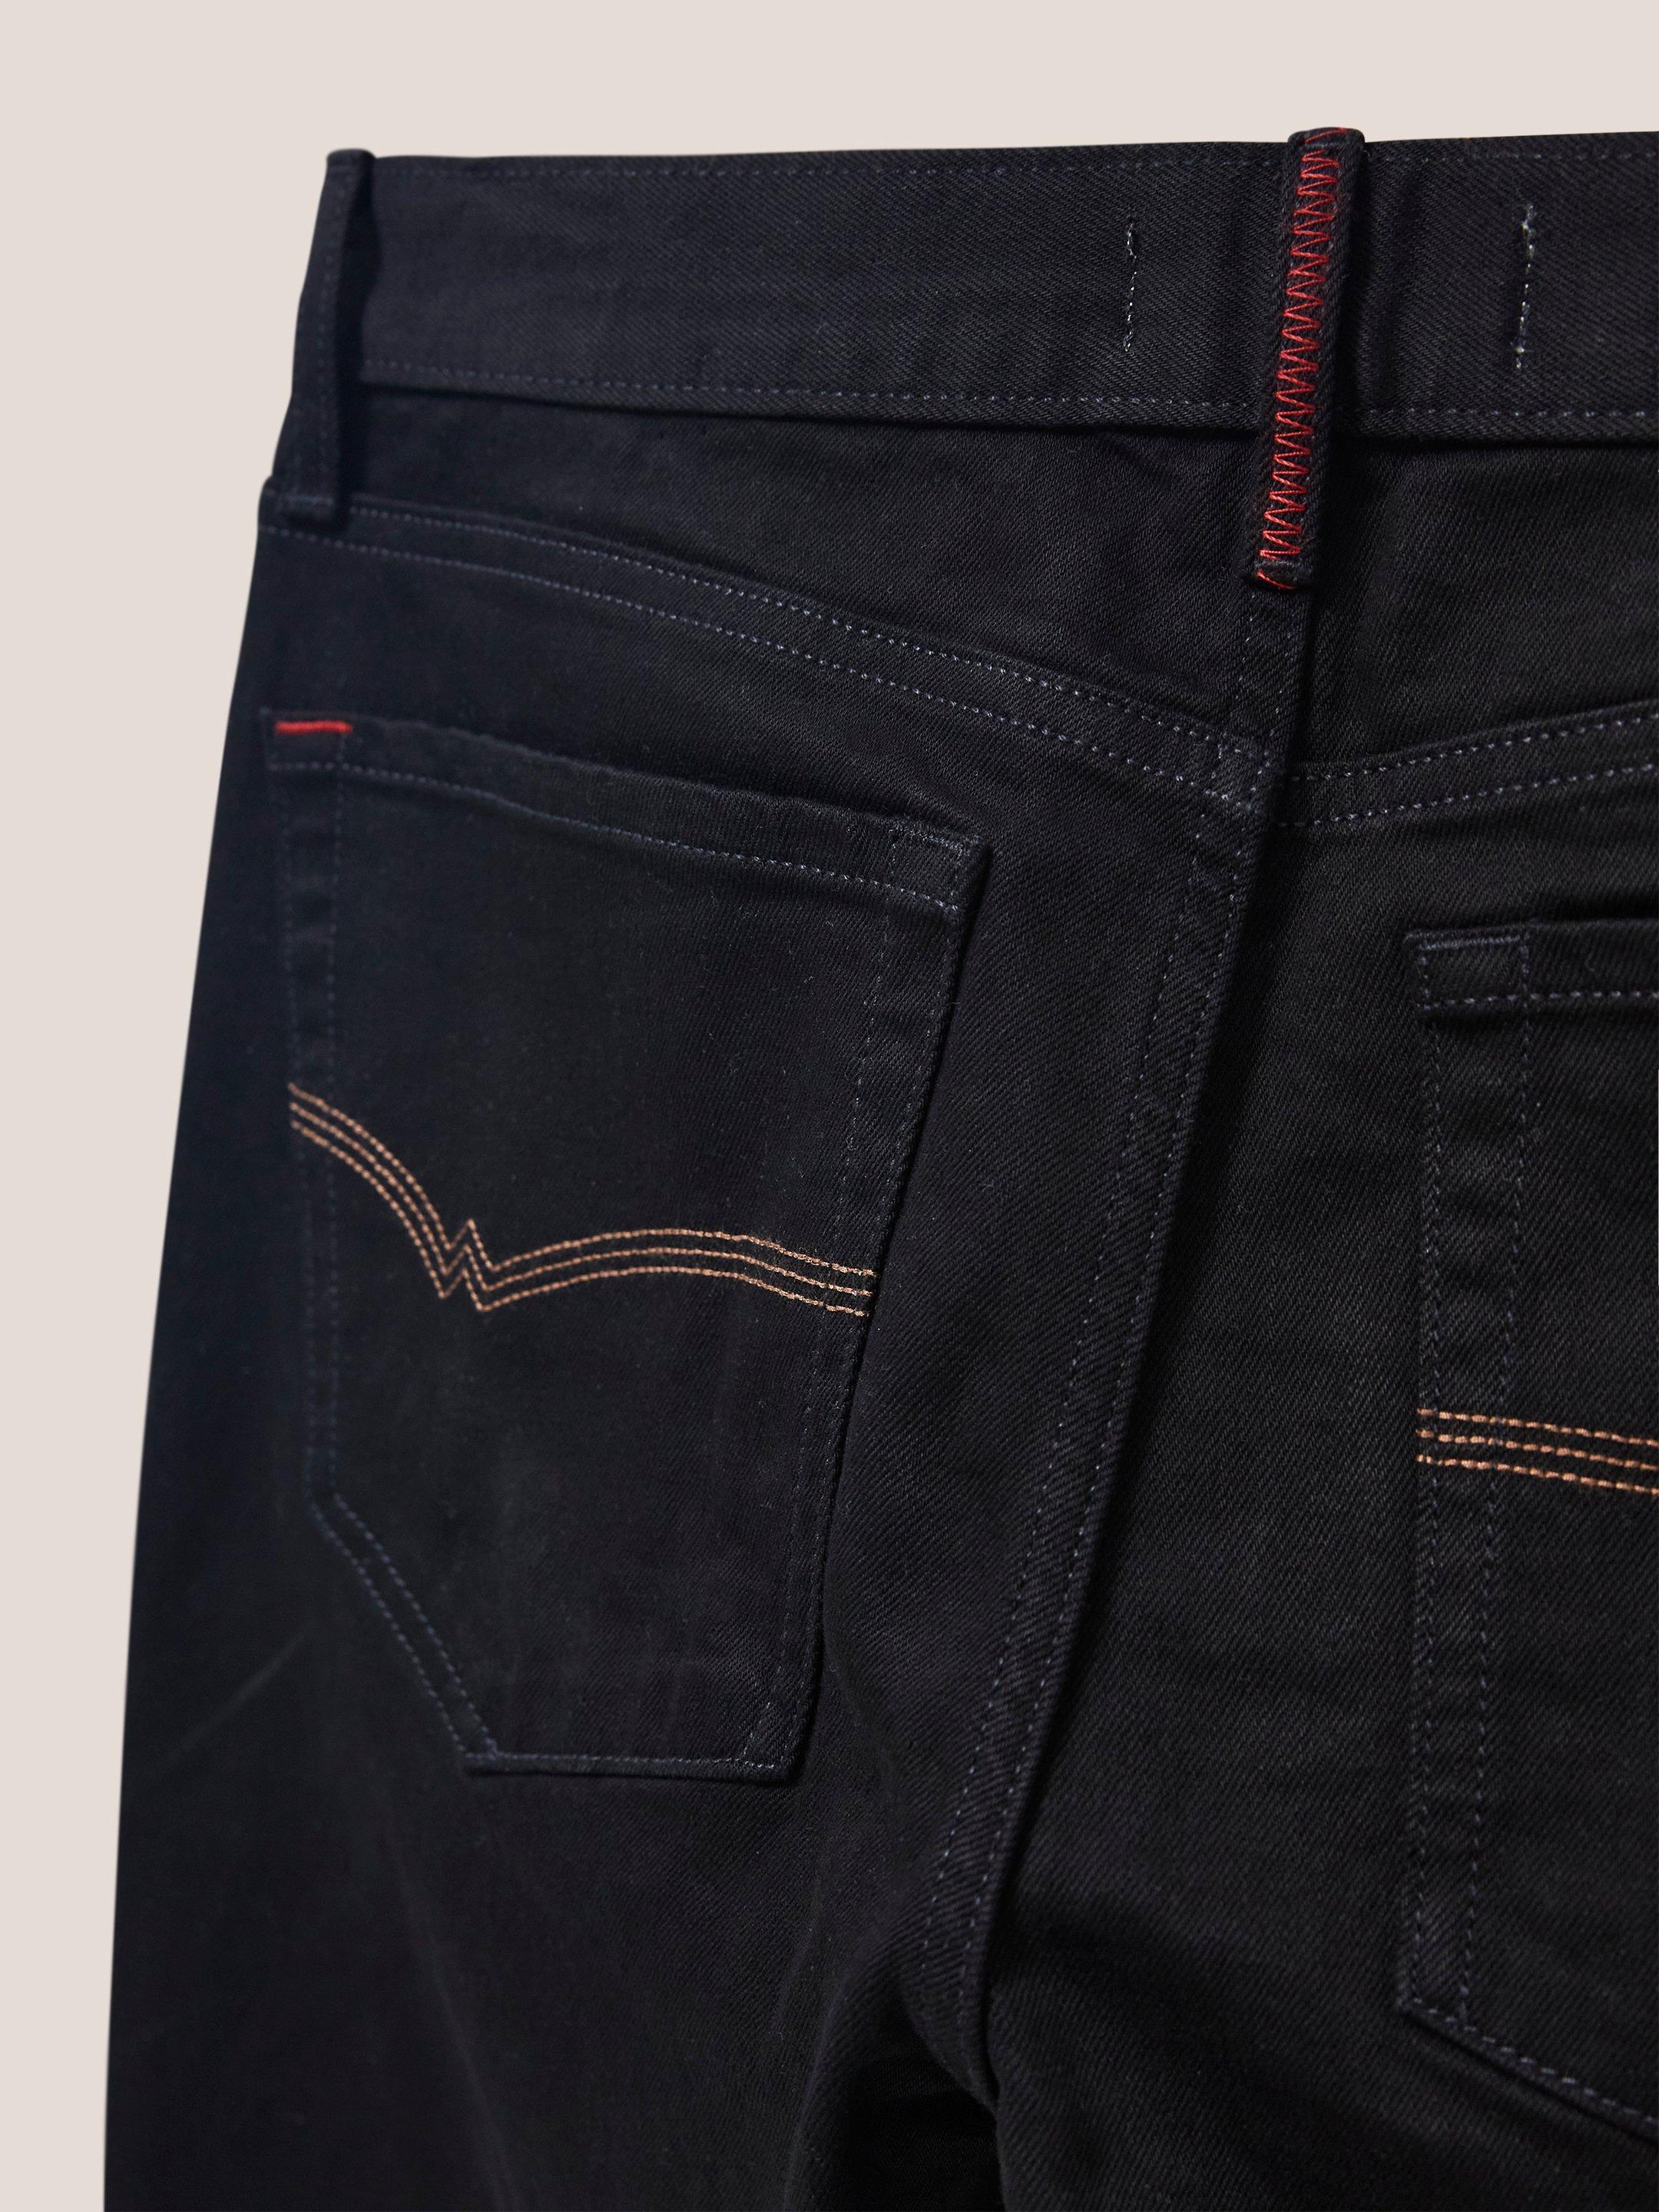 Harwood Straight Jean in PURE BLK - FLAT DETAIL